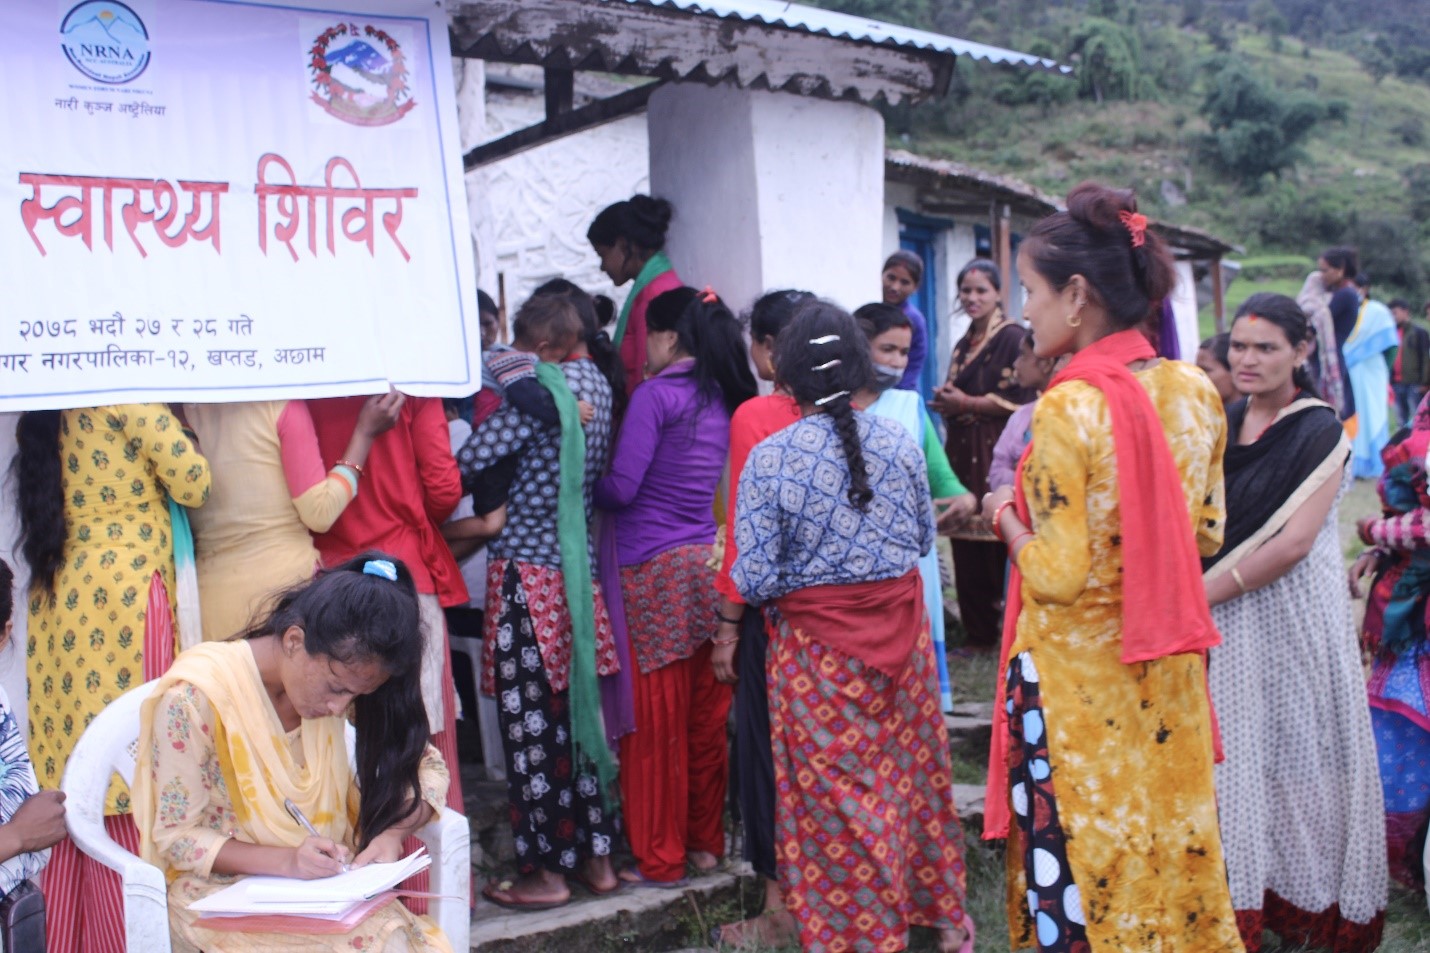 A uterine prolapse camp was held in Khaptad.